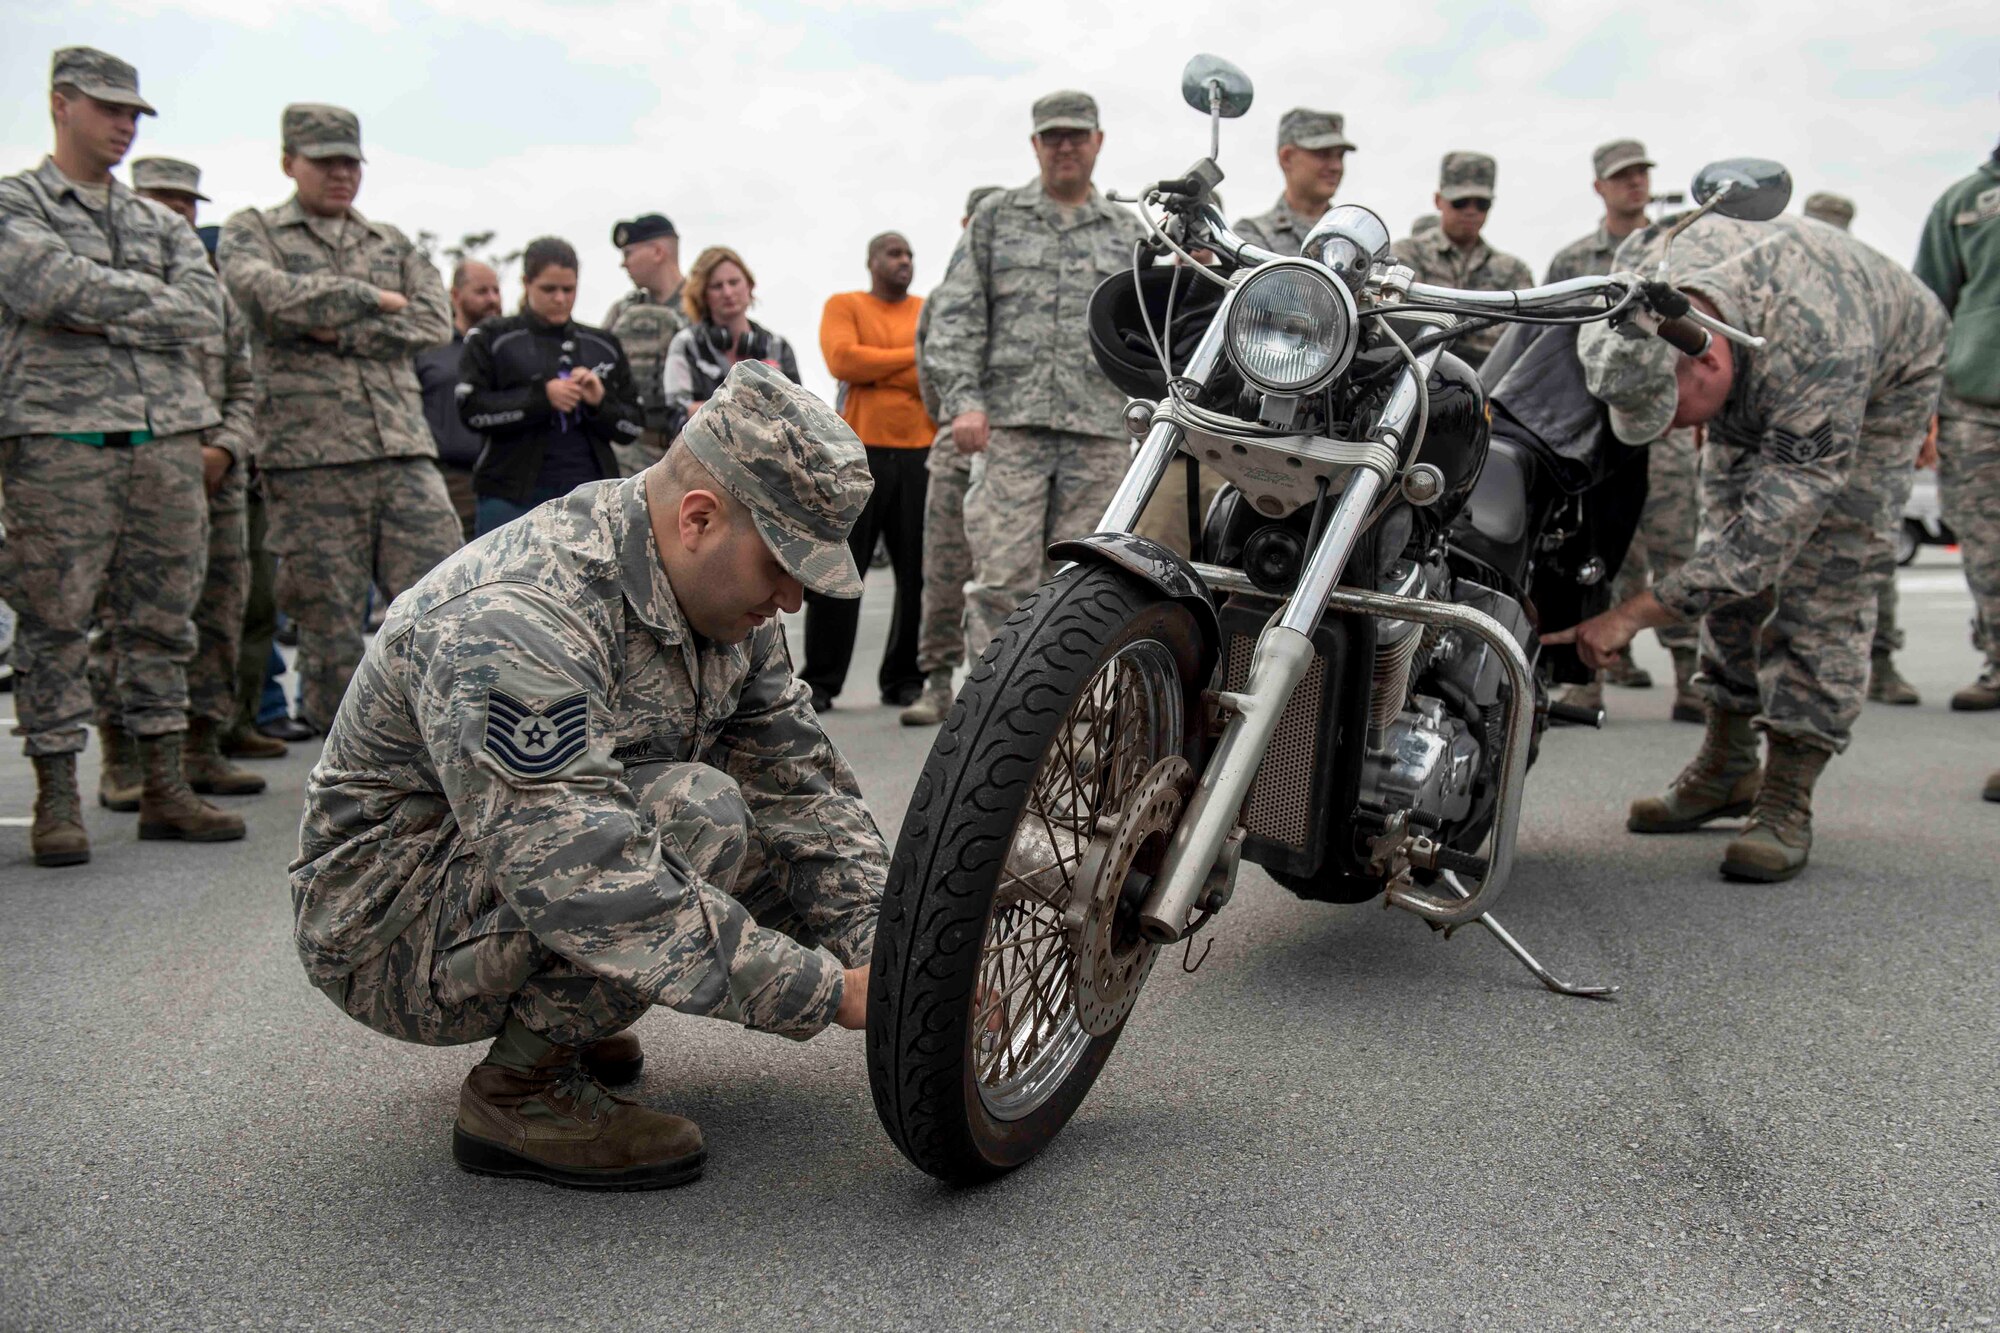 U.S. Air Force Tech. Sgt. Victor Estupinan, motorcycle rider, performs a pre-ride inspection checklist on his bike during an 18th Wing annual motorcycle safety brief March 9, 2017, at Kadena Air Base, Japan. Wing Safety and the Green Knights chapter 138 hosted the event to reinforce safety requirements and to promote mentorship opportunities for riders. (U.S. Air Force photo by Staff Sgt. Peter Reft/Released)